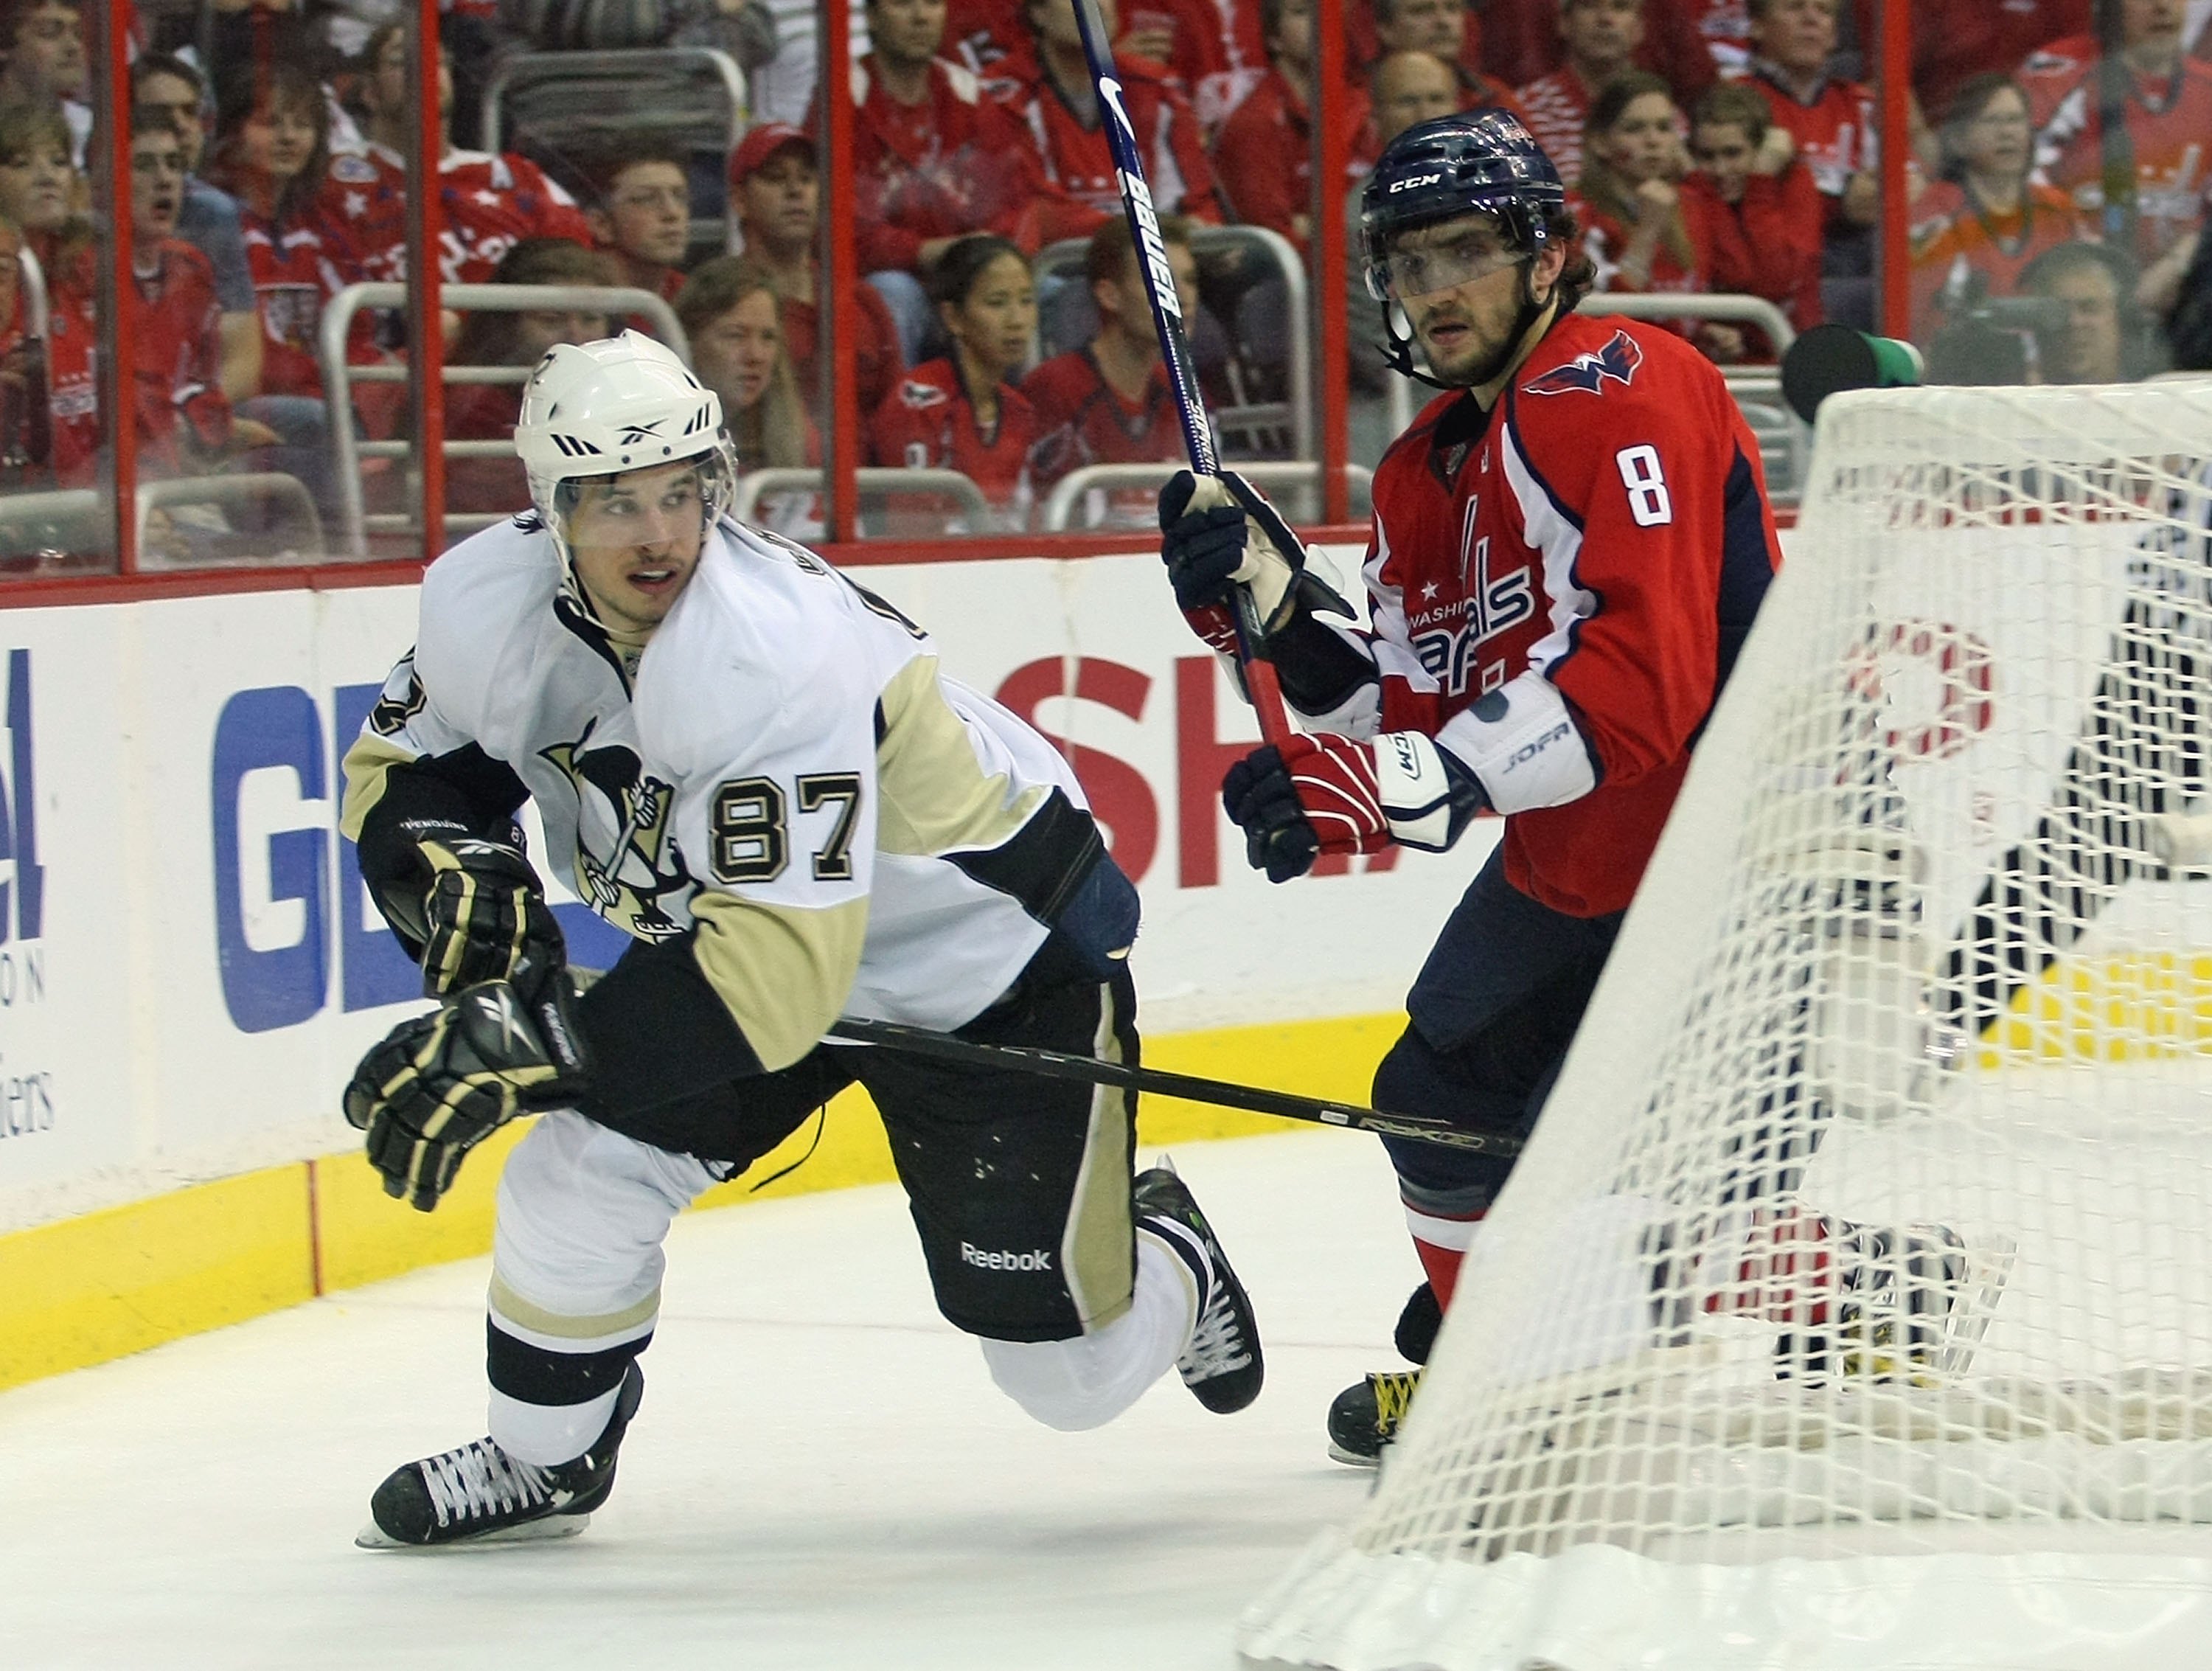 10 years of Crosby and Ovechkin: Bad bounces derailed the rivalry